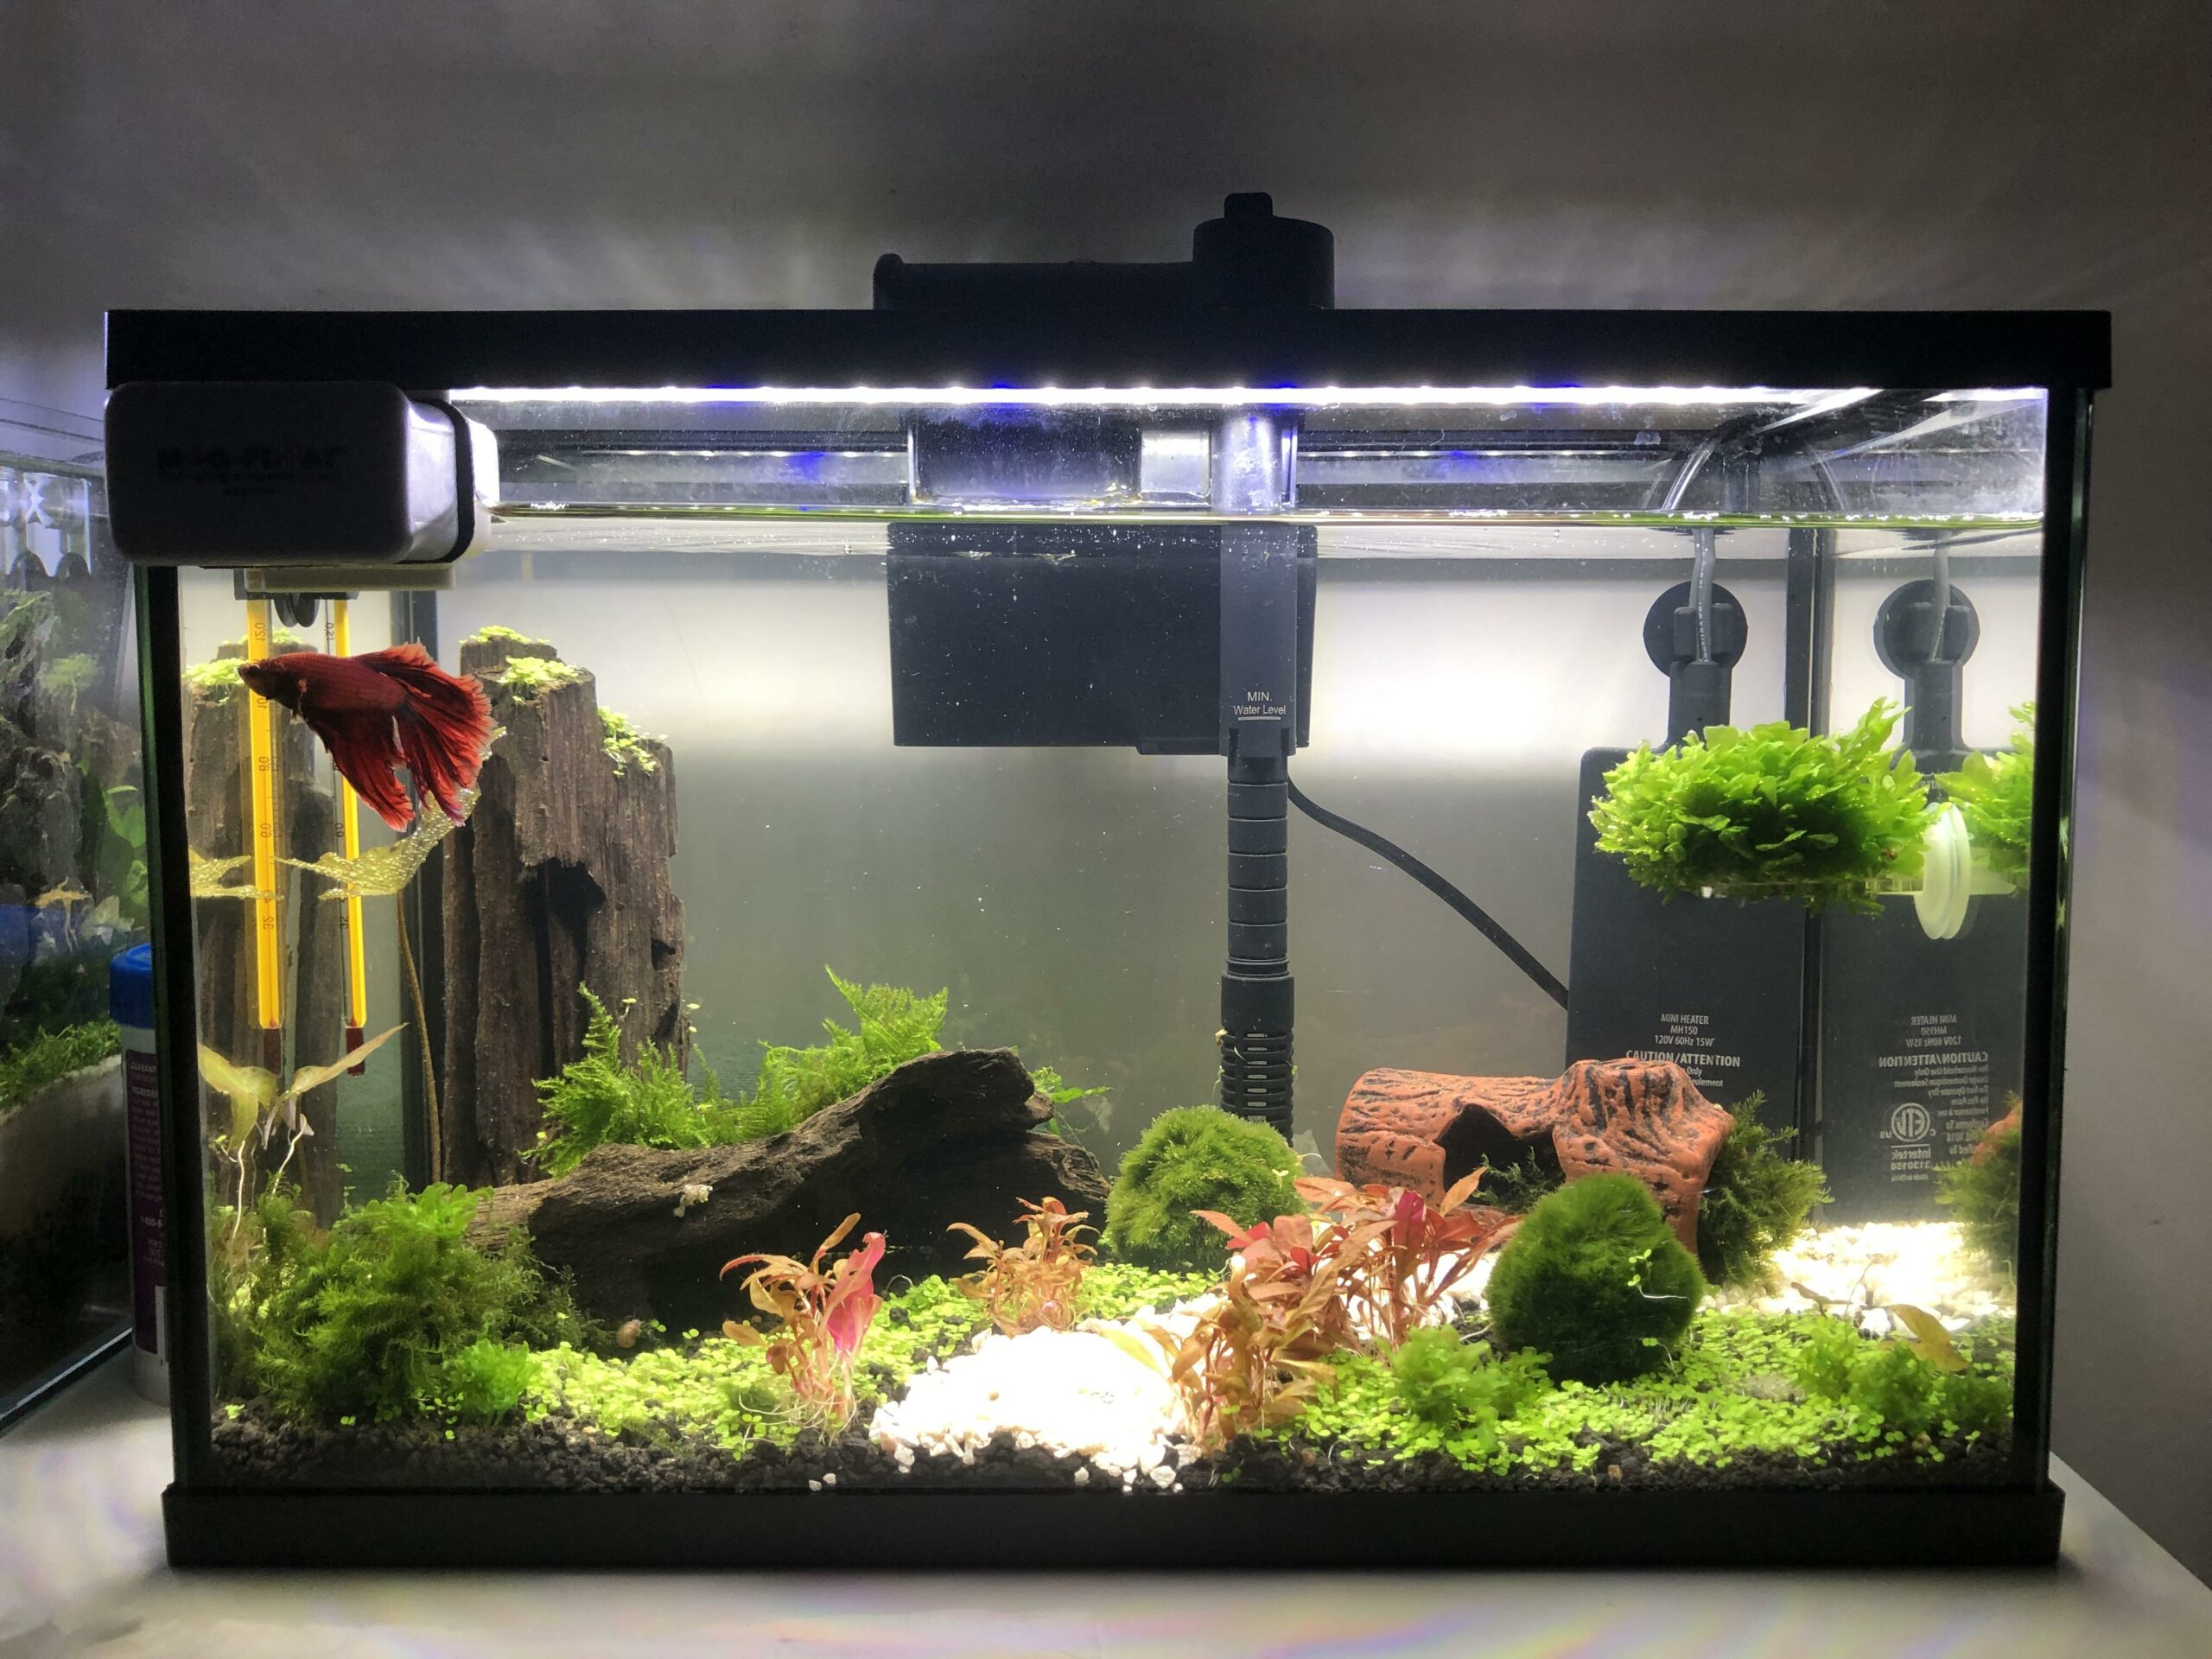 How to set up a betta fish tank